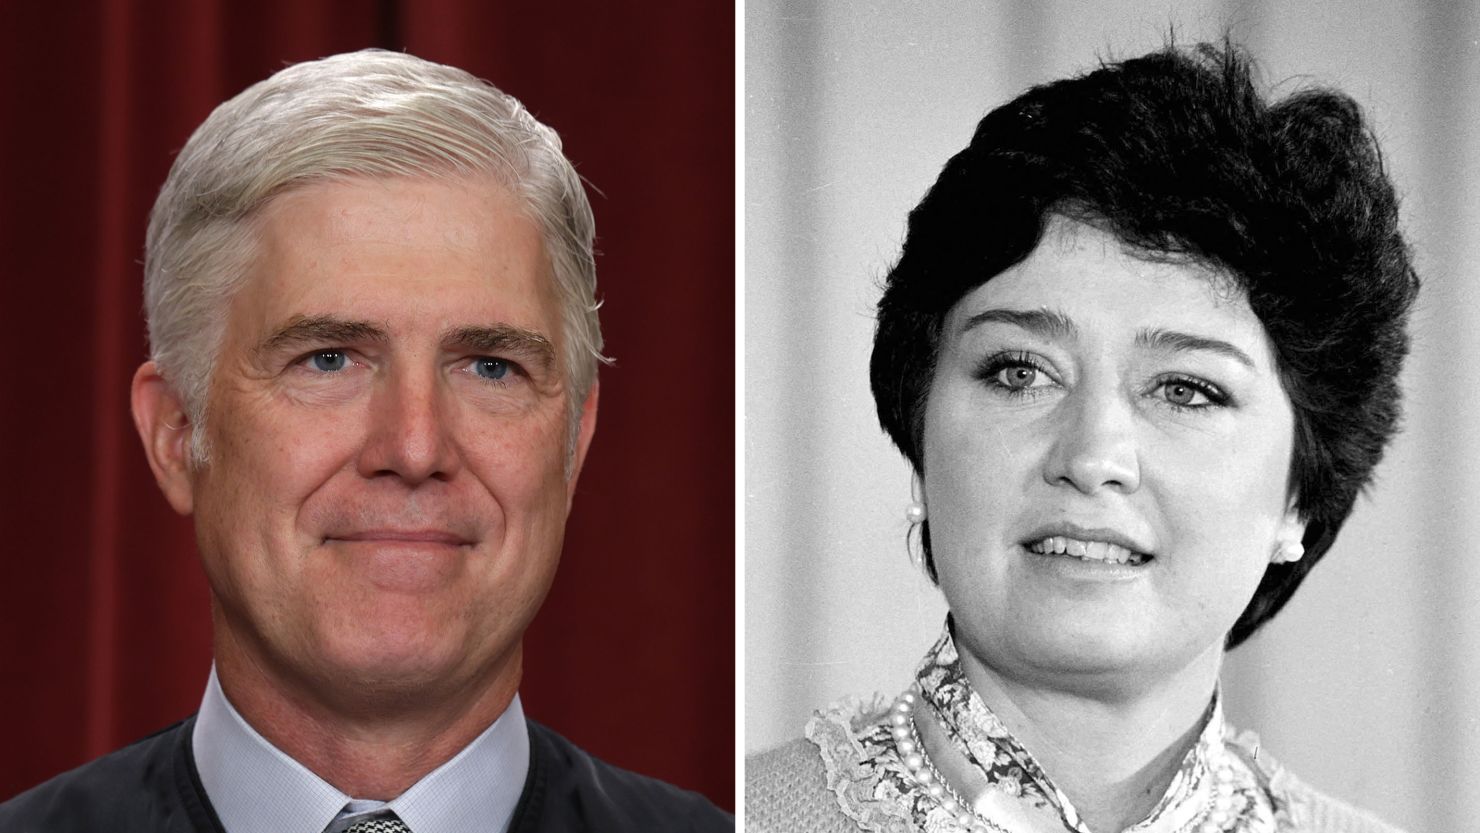 Supreme Court Justice Neil Gorsuch and his mother, EPA director Anne Gorsuch Burford.